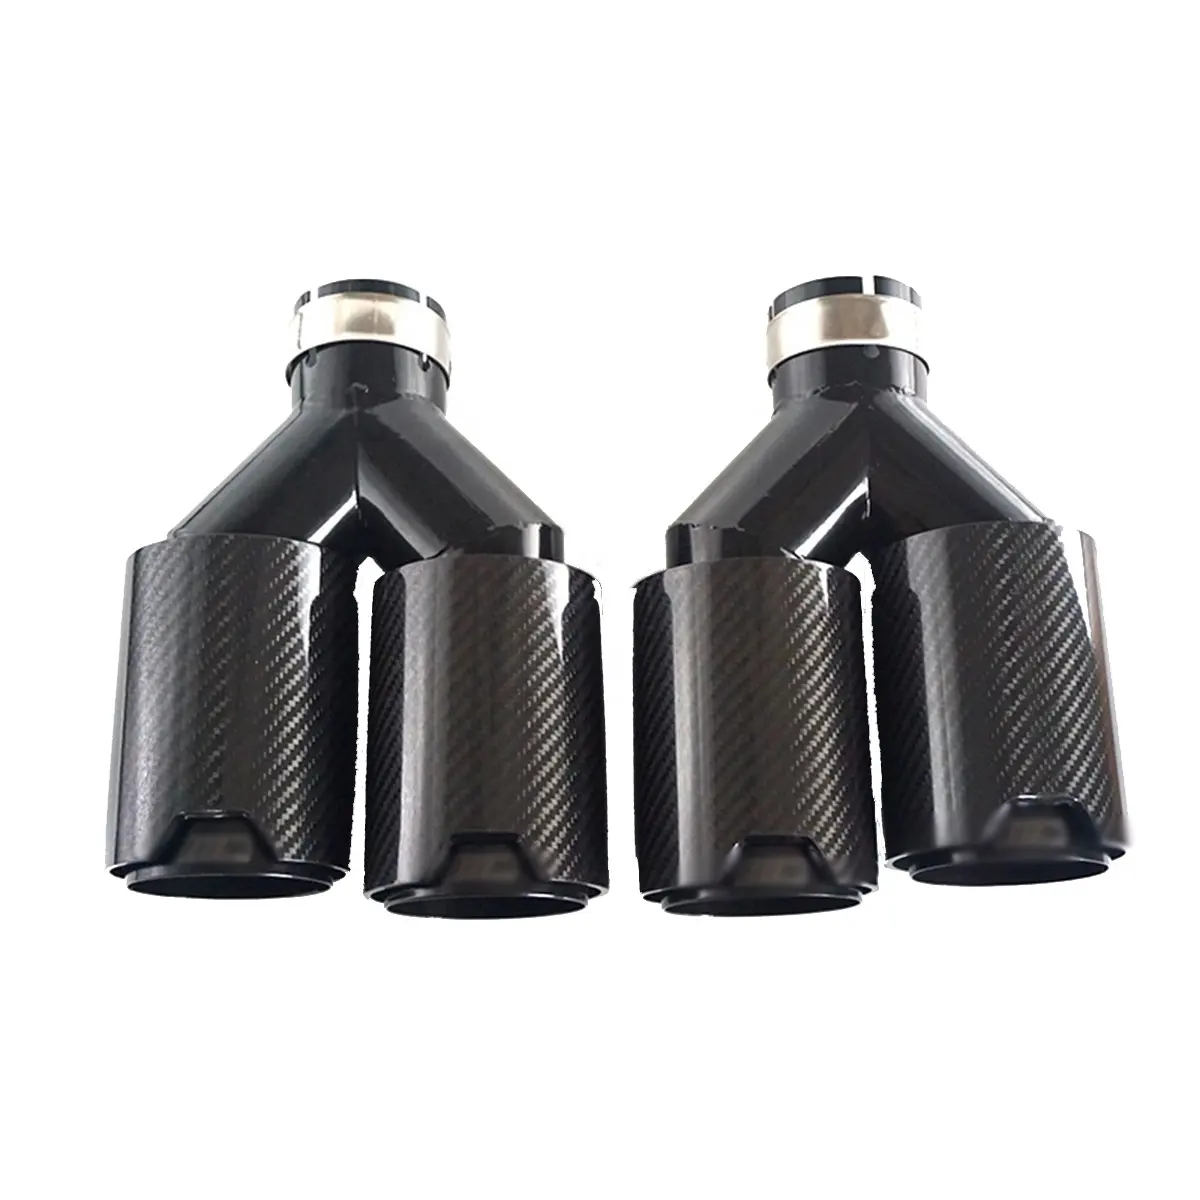 Auto exhaust pipe factory customized M performance black carbon fiber + stainless steel muffler 63mm caliber for BMW logo